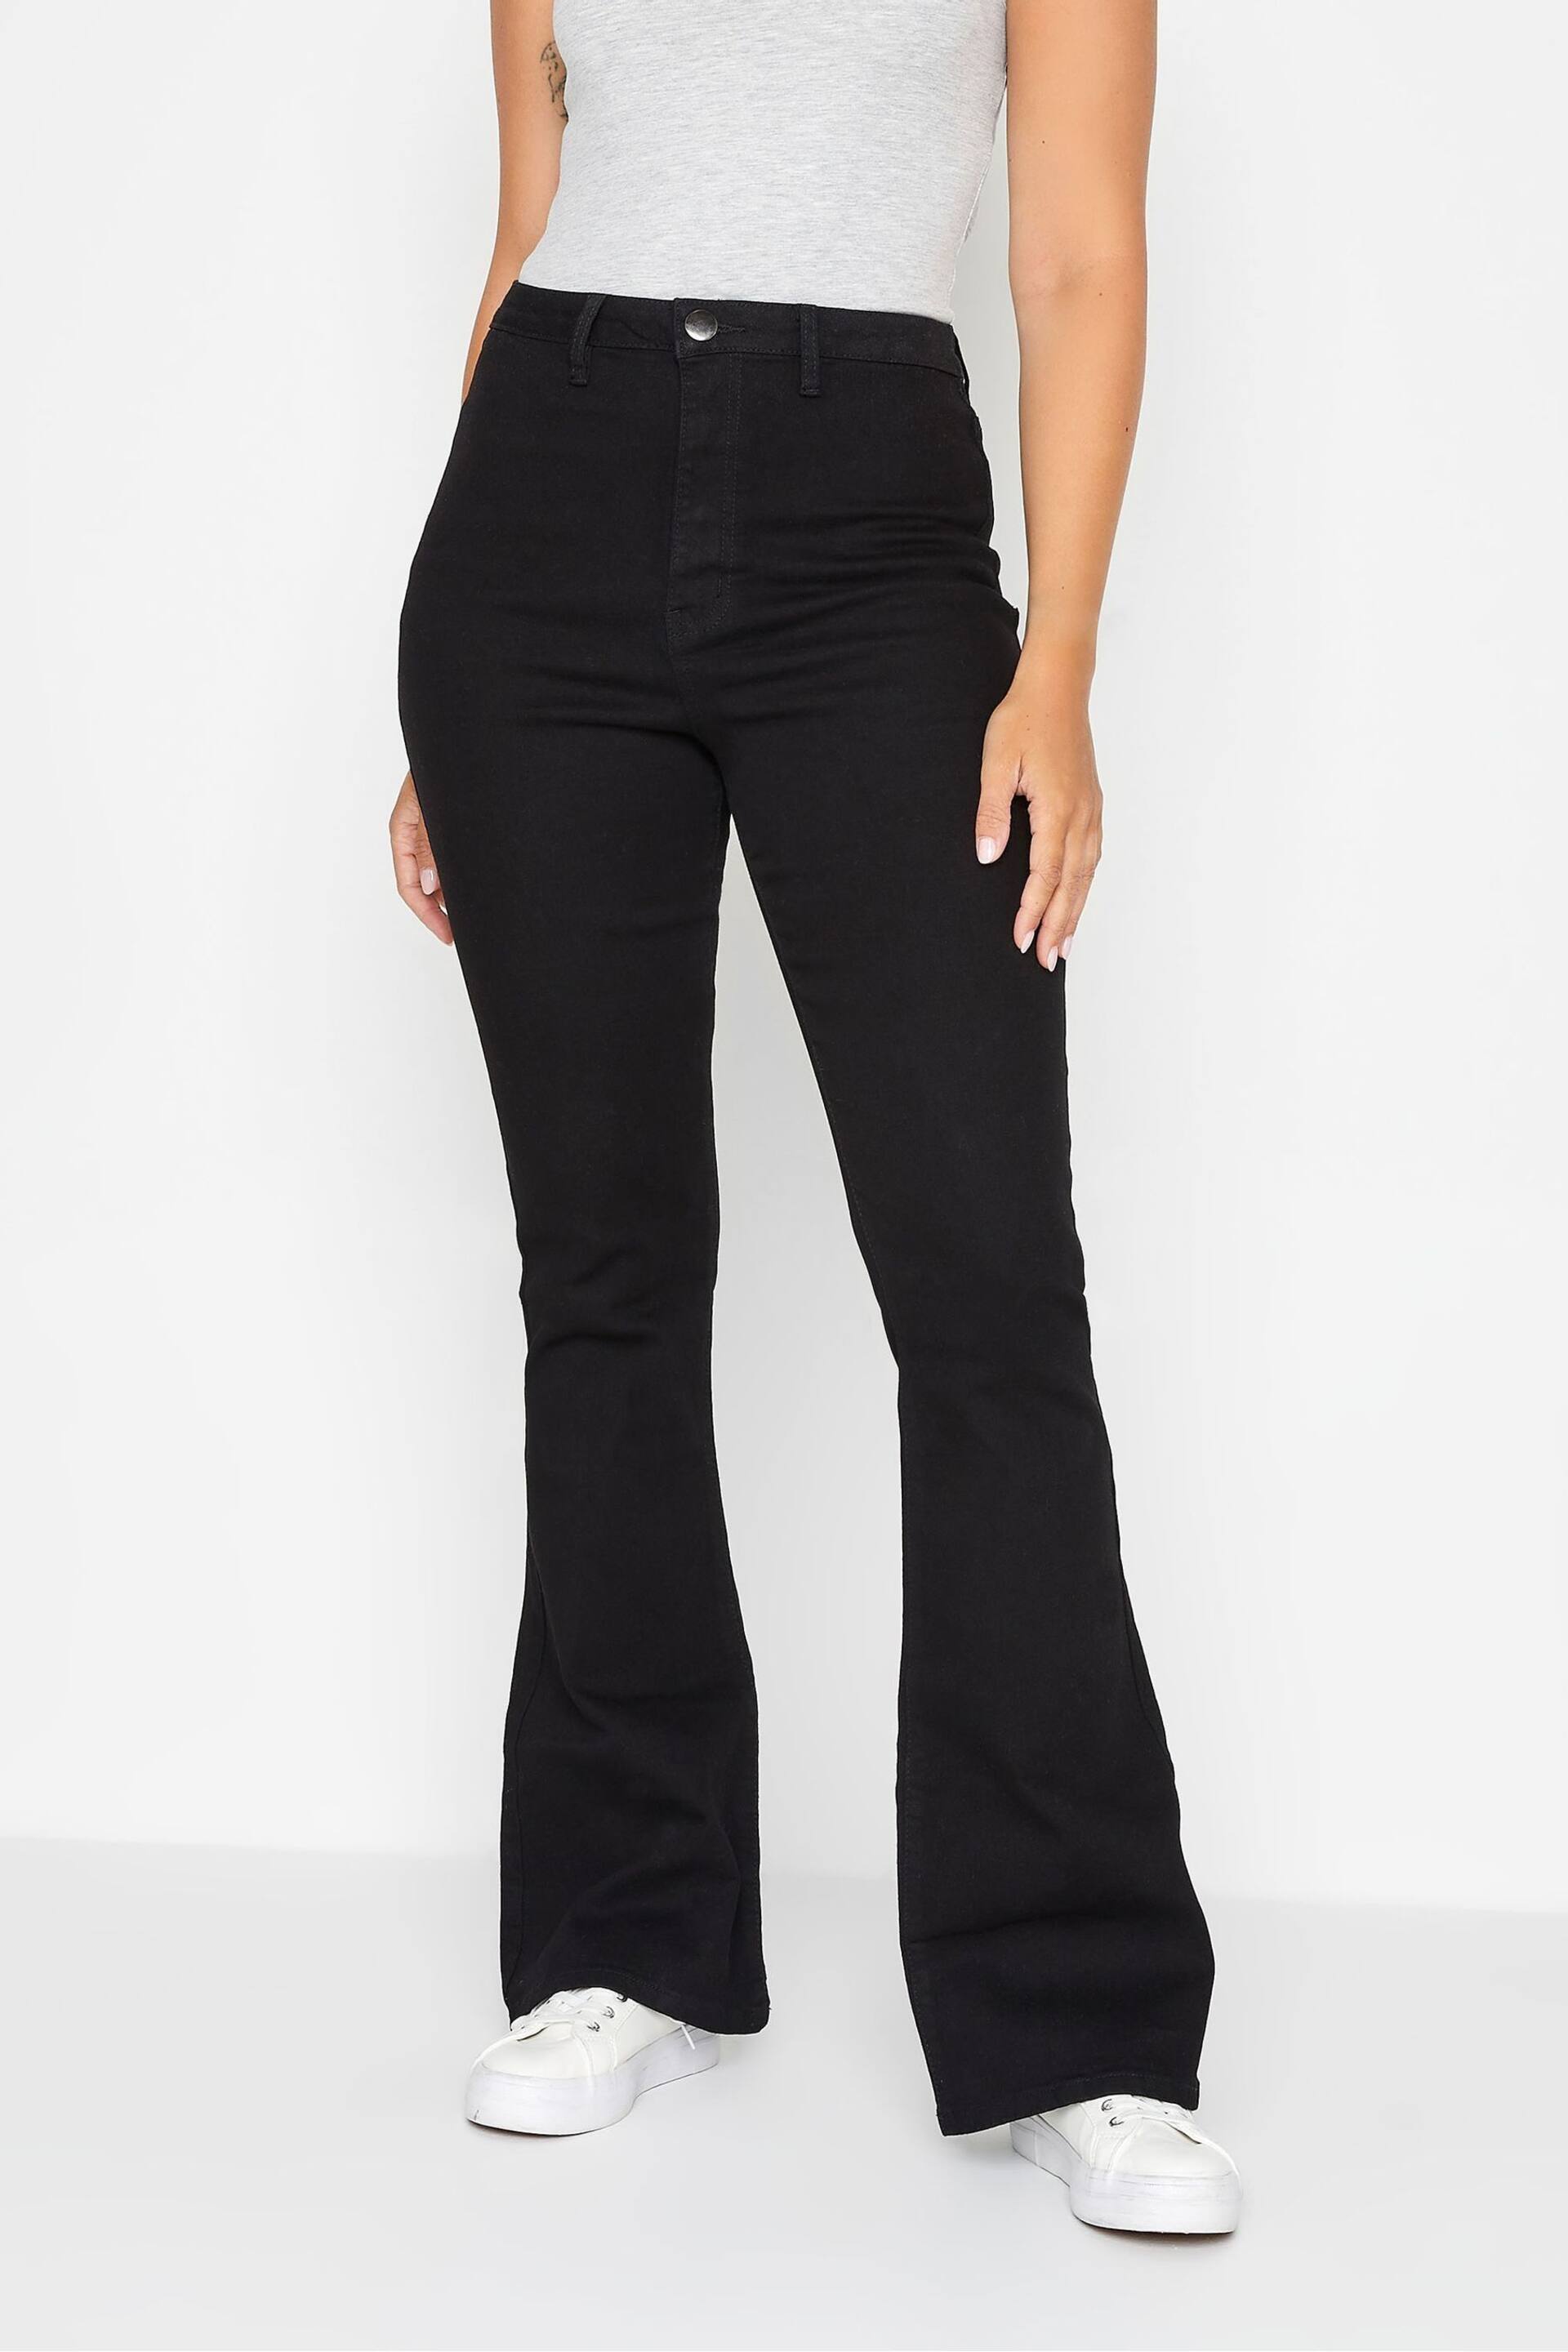 Long Tall Sally Gloss Black Flare Jeans - Image 3 of 3